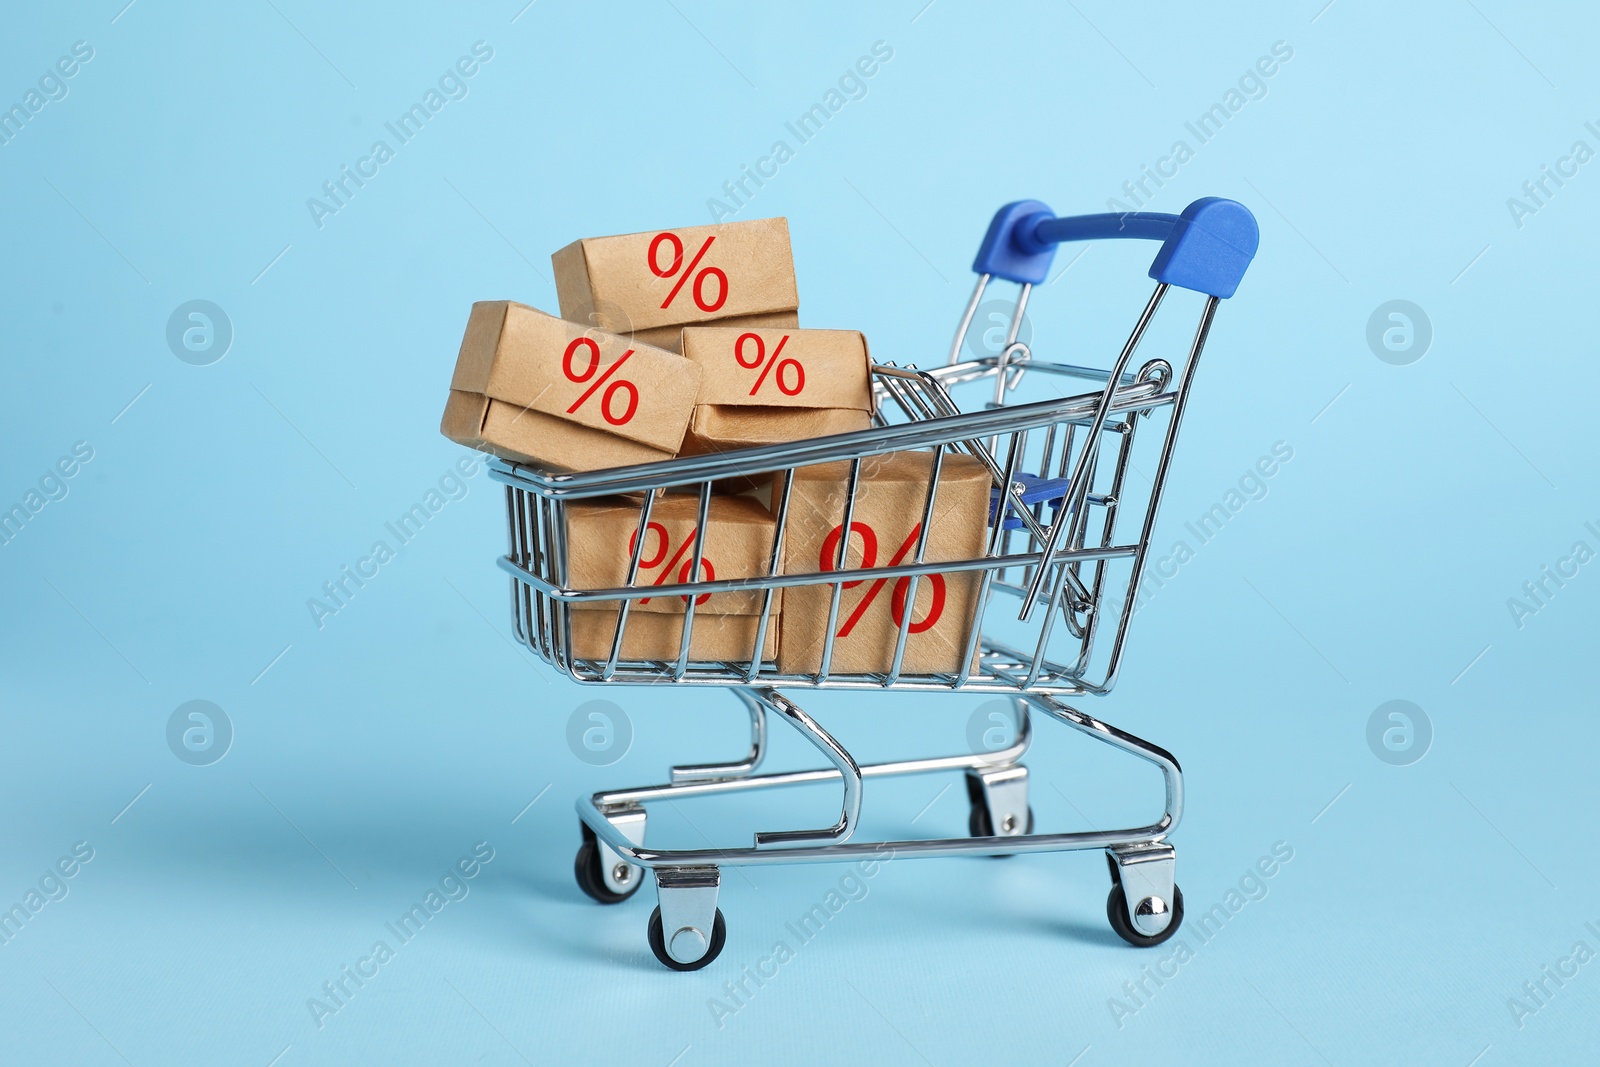 Image of Discount offer. Boxes with percent signs in mini shopping cart on light blue background